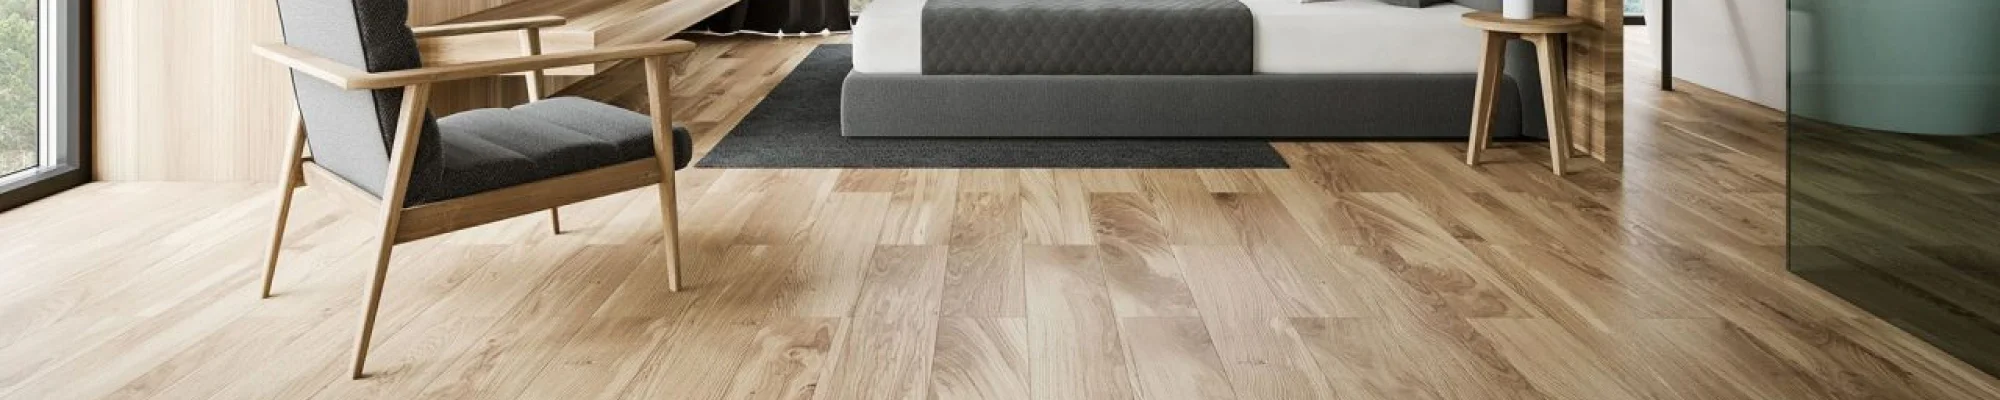 Flooring services including product price compare at Express Flooring in Kelowna BC